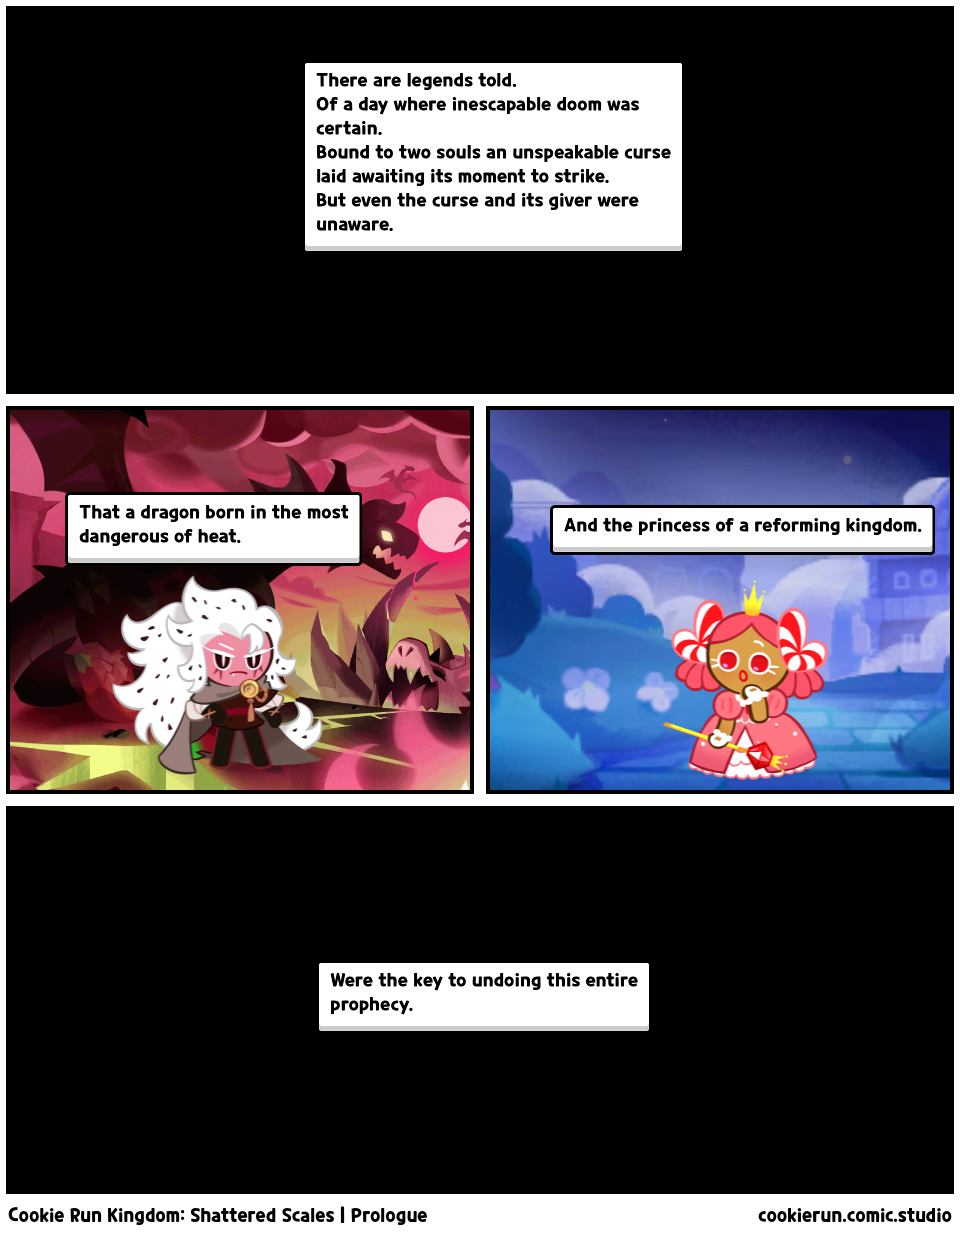 Cookie Run Kingdom: Shattered Scales | Prologue